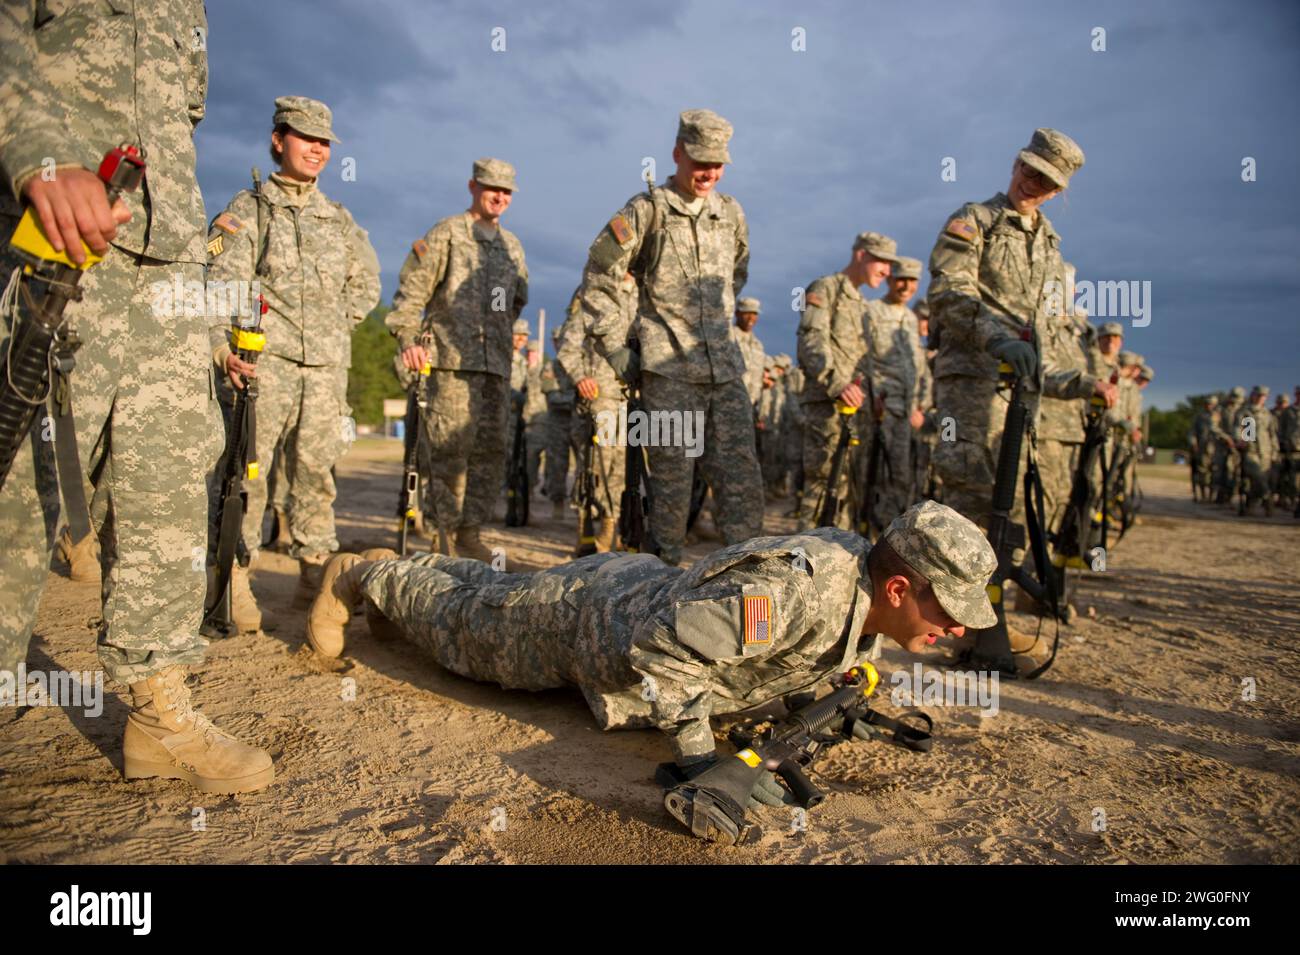 After getting yelled at by his drill sergeant, a soldier in basic training does push-ups as his rifle rests safely on his hands. Stock Photo